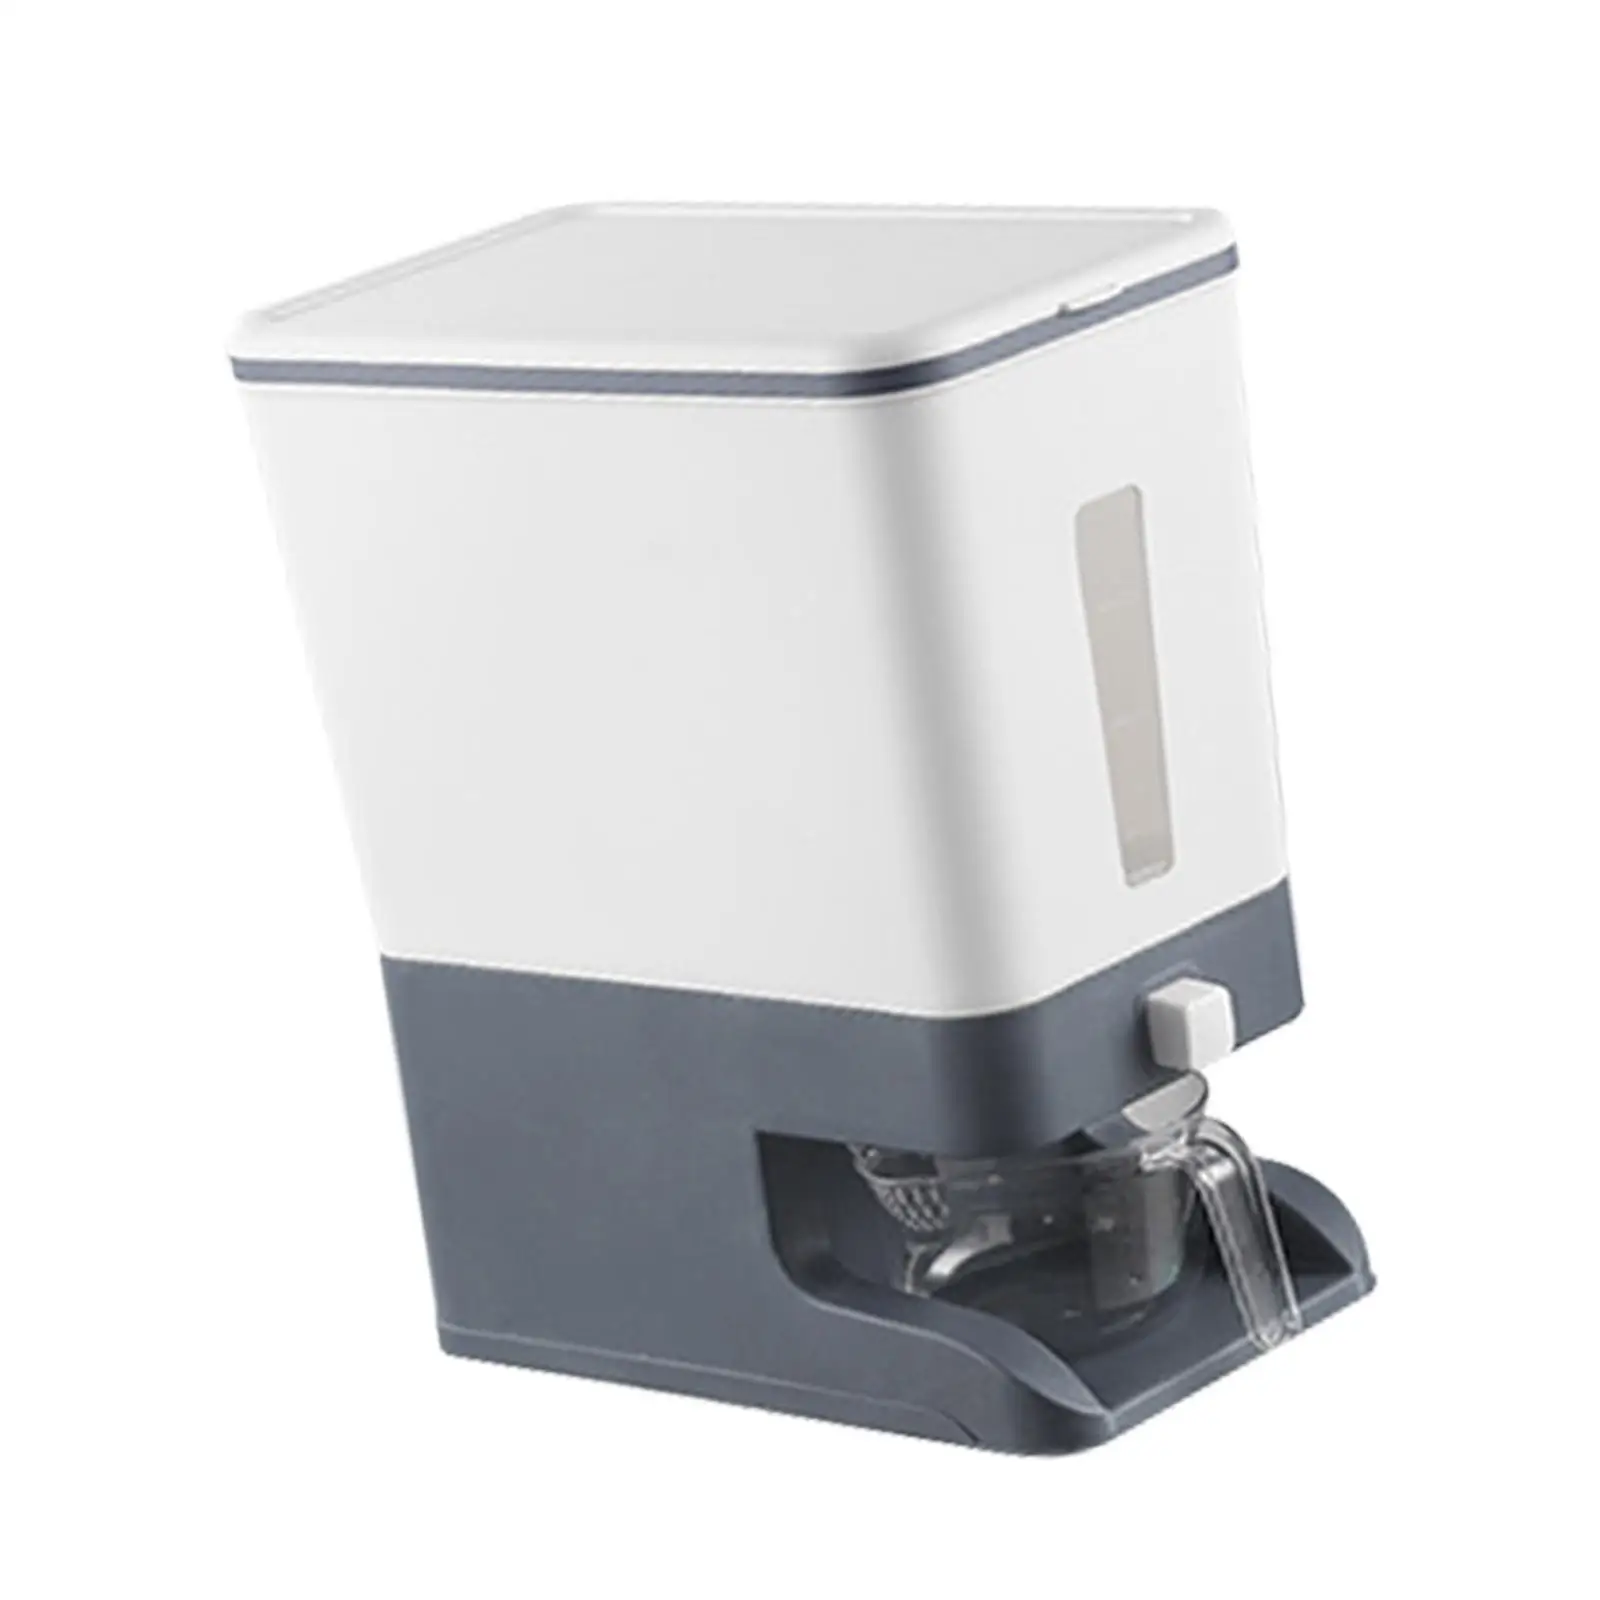 10kg Rice Dispenser Cereal Dispenser Food Container Rice Storage Bin Sealed Lid for Grain Nuts Snacks Rice Beans